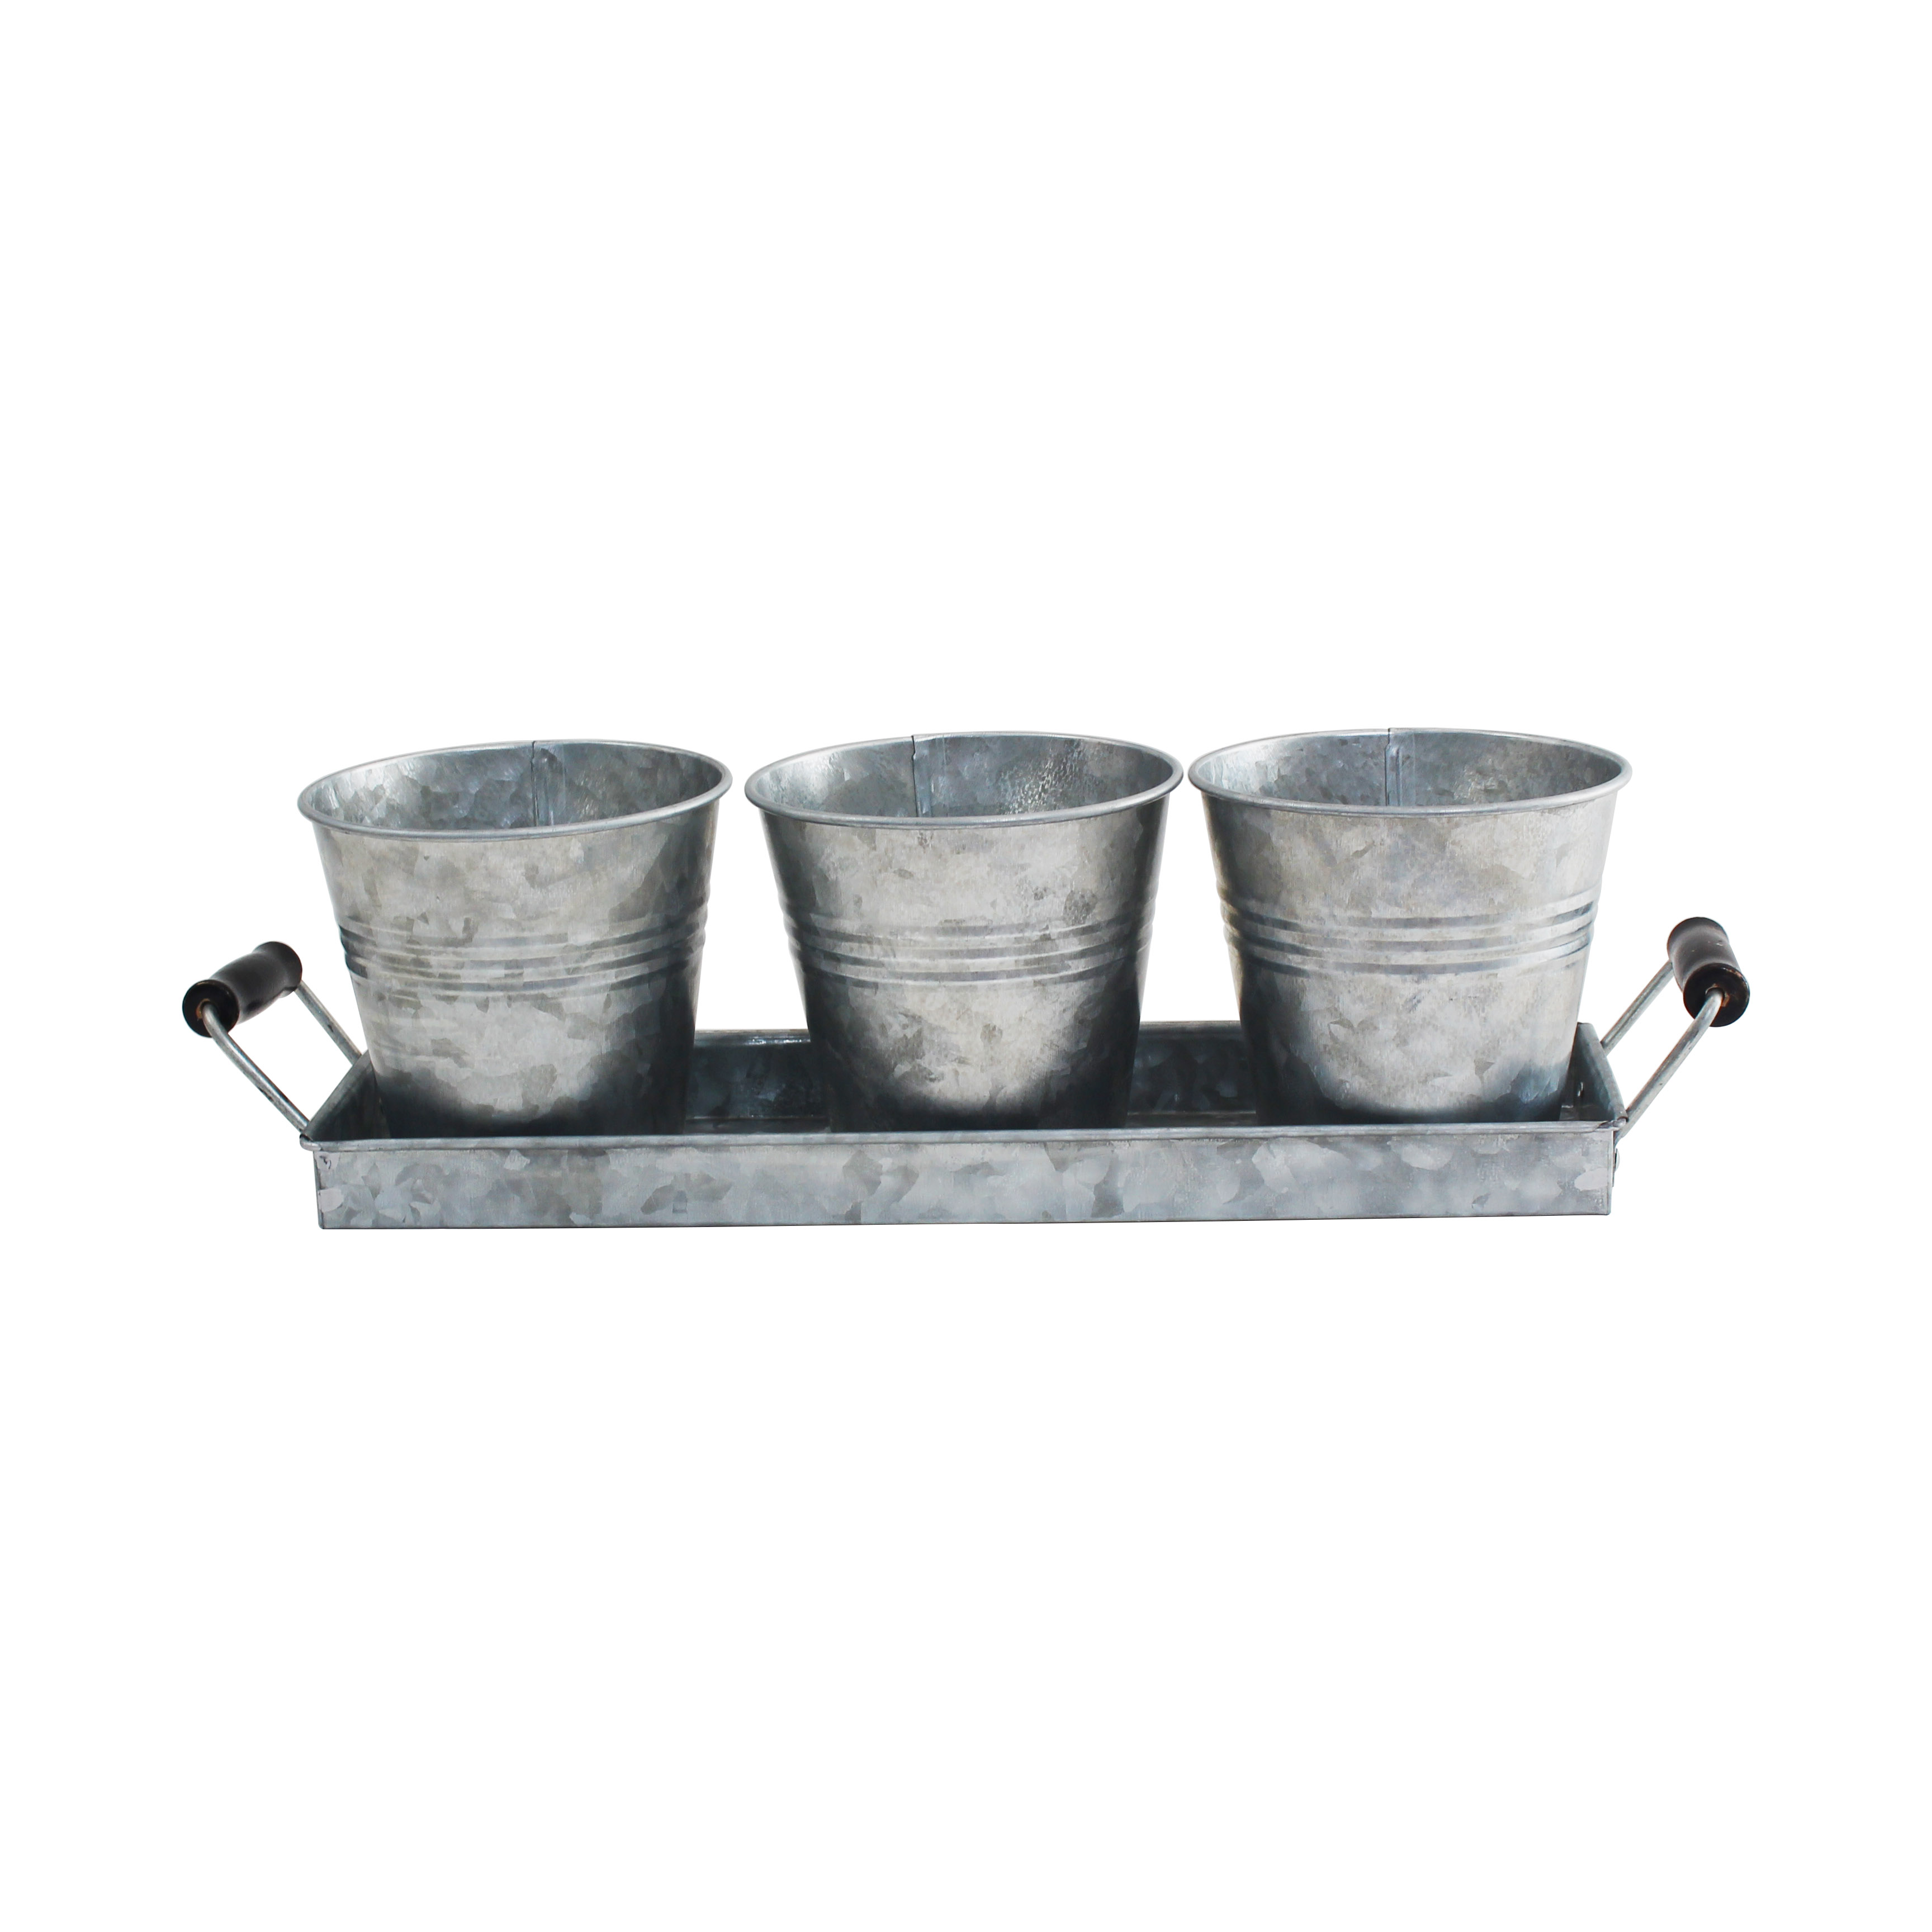 Set of 3 Galvanized Metal Windowsill Planters Herb Pots With Tray